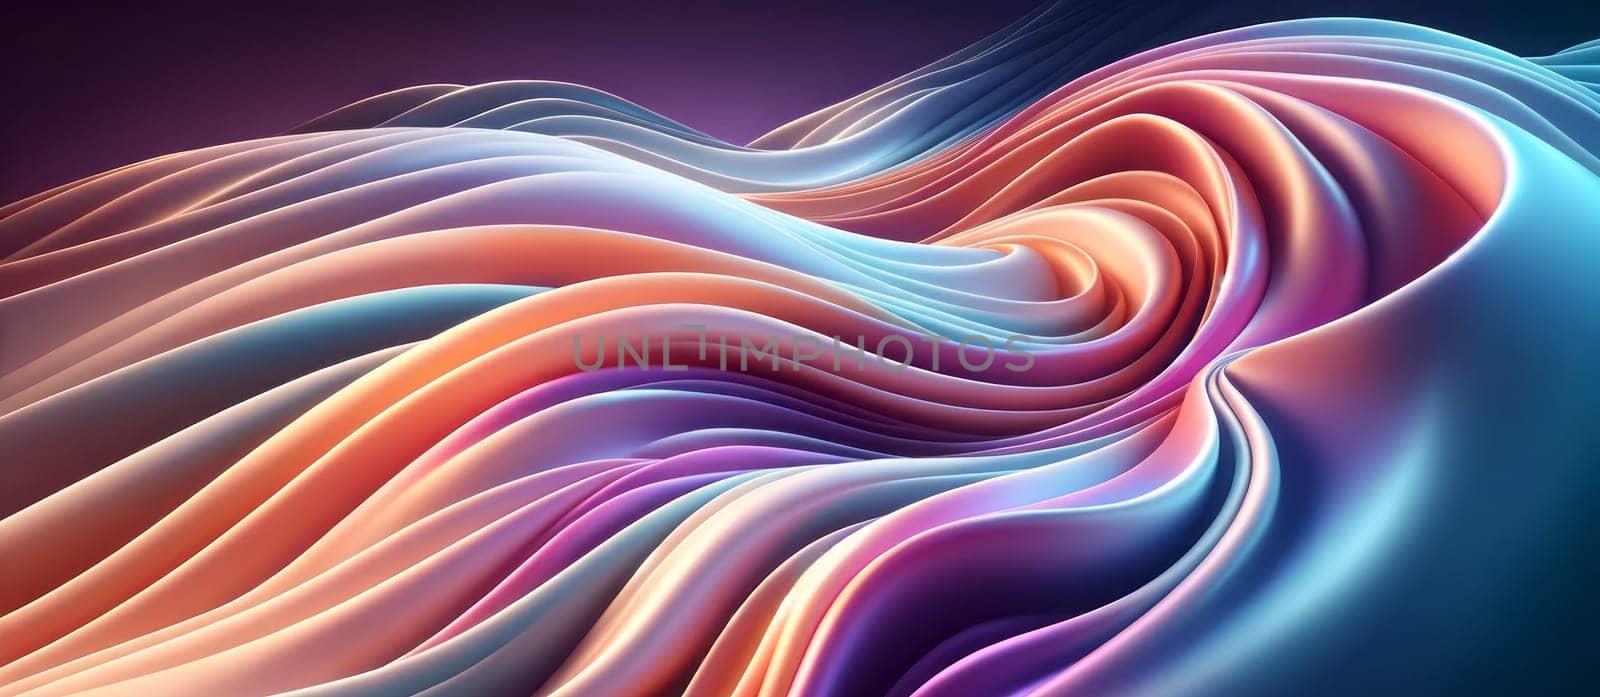 A wide digital illustration of a flowing satin by nkotlyar